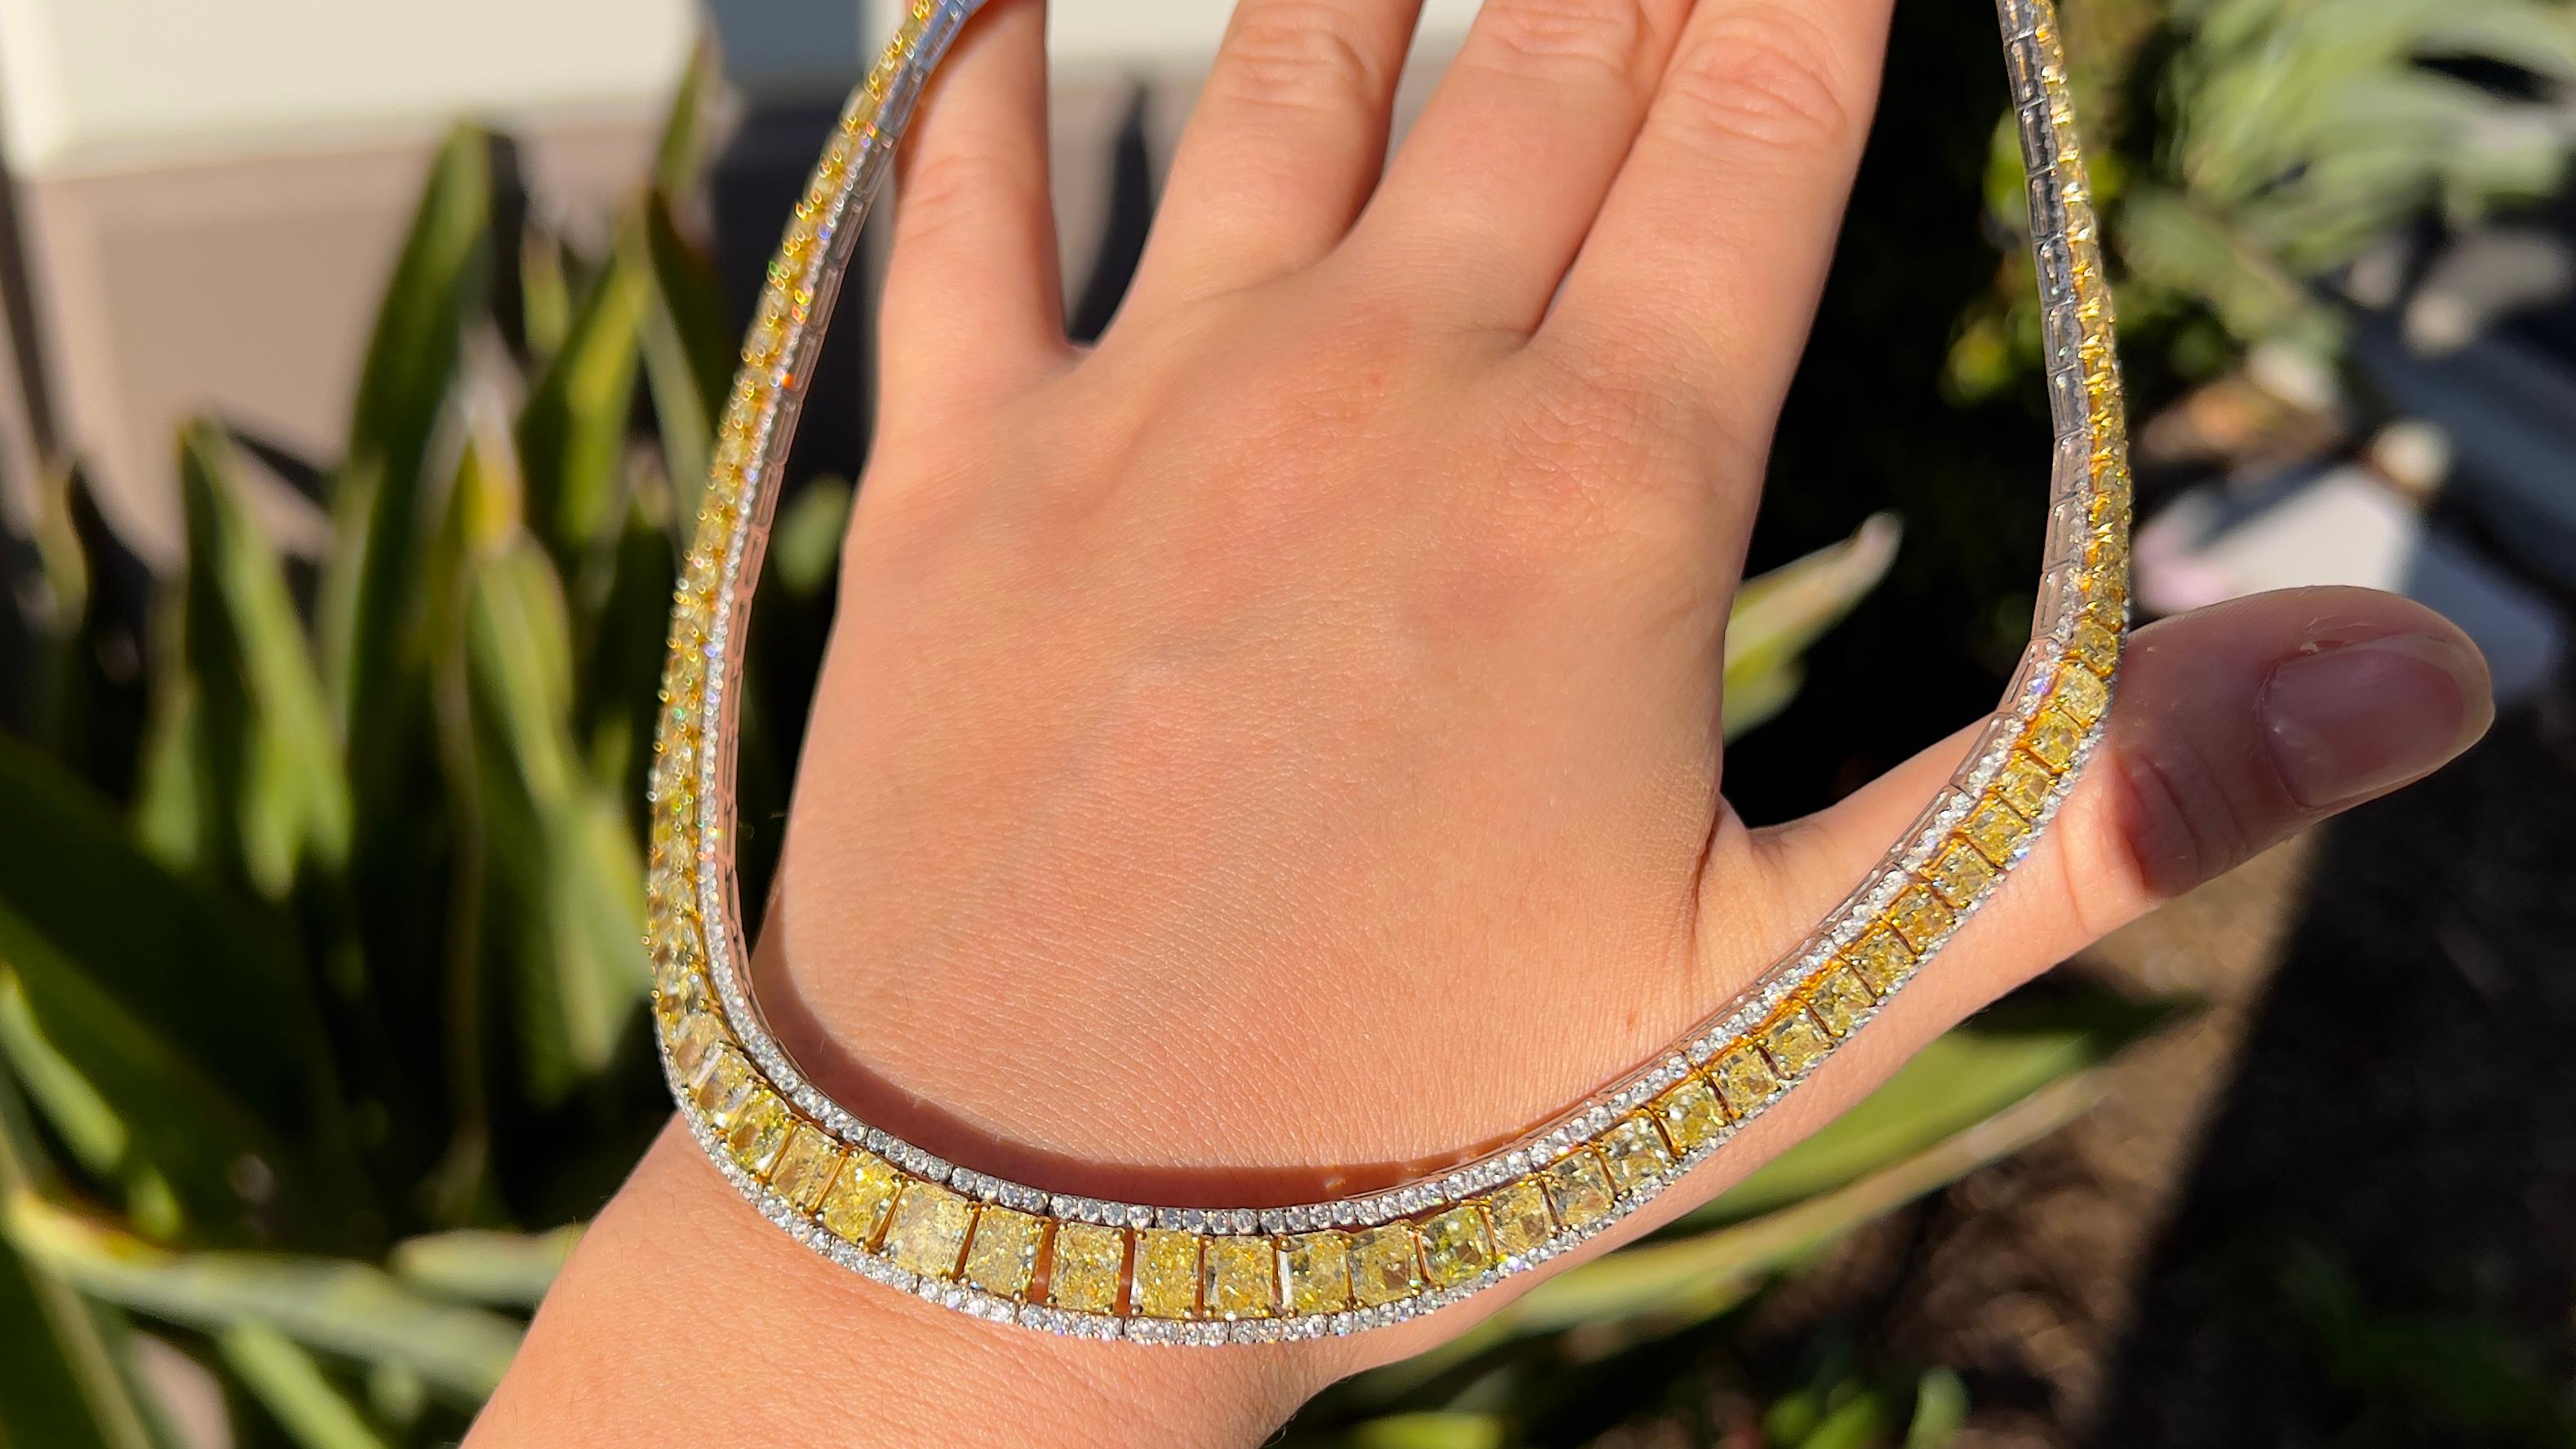 Canary Diamonds = 45 Carats
White Diamonds = 8.5 Carats
( Color: F, Clarity: VS )
Metal: 18K Gold
Length: 17 Inches